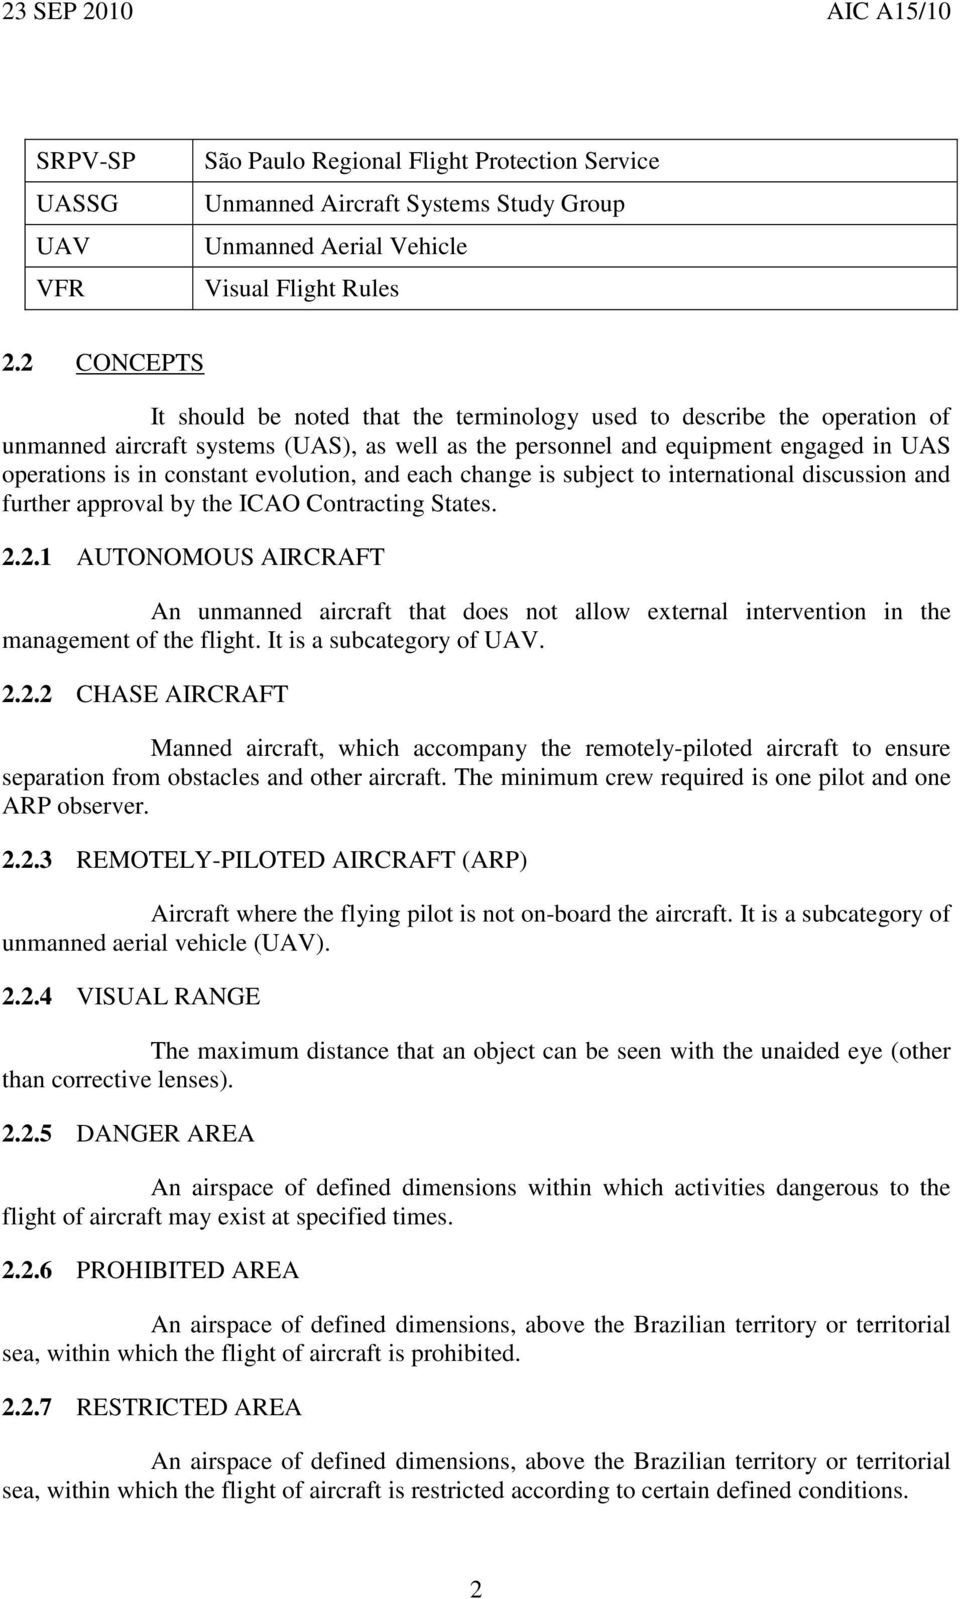 evolution, and each change is subject to international discussion and further approval by the ICAO Contracting States. 2.